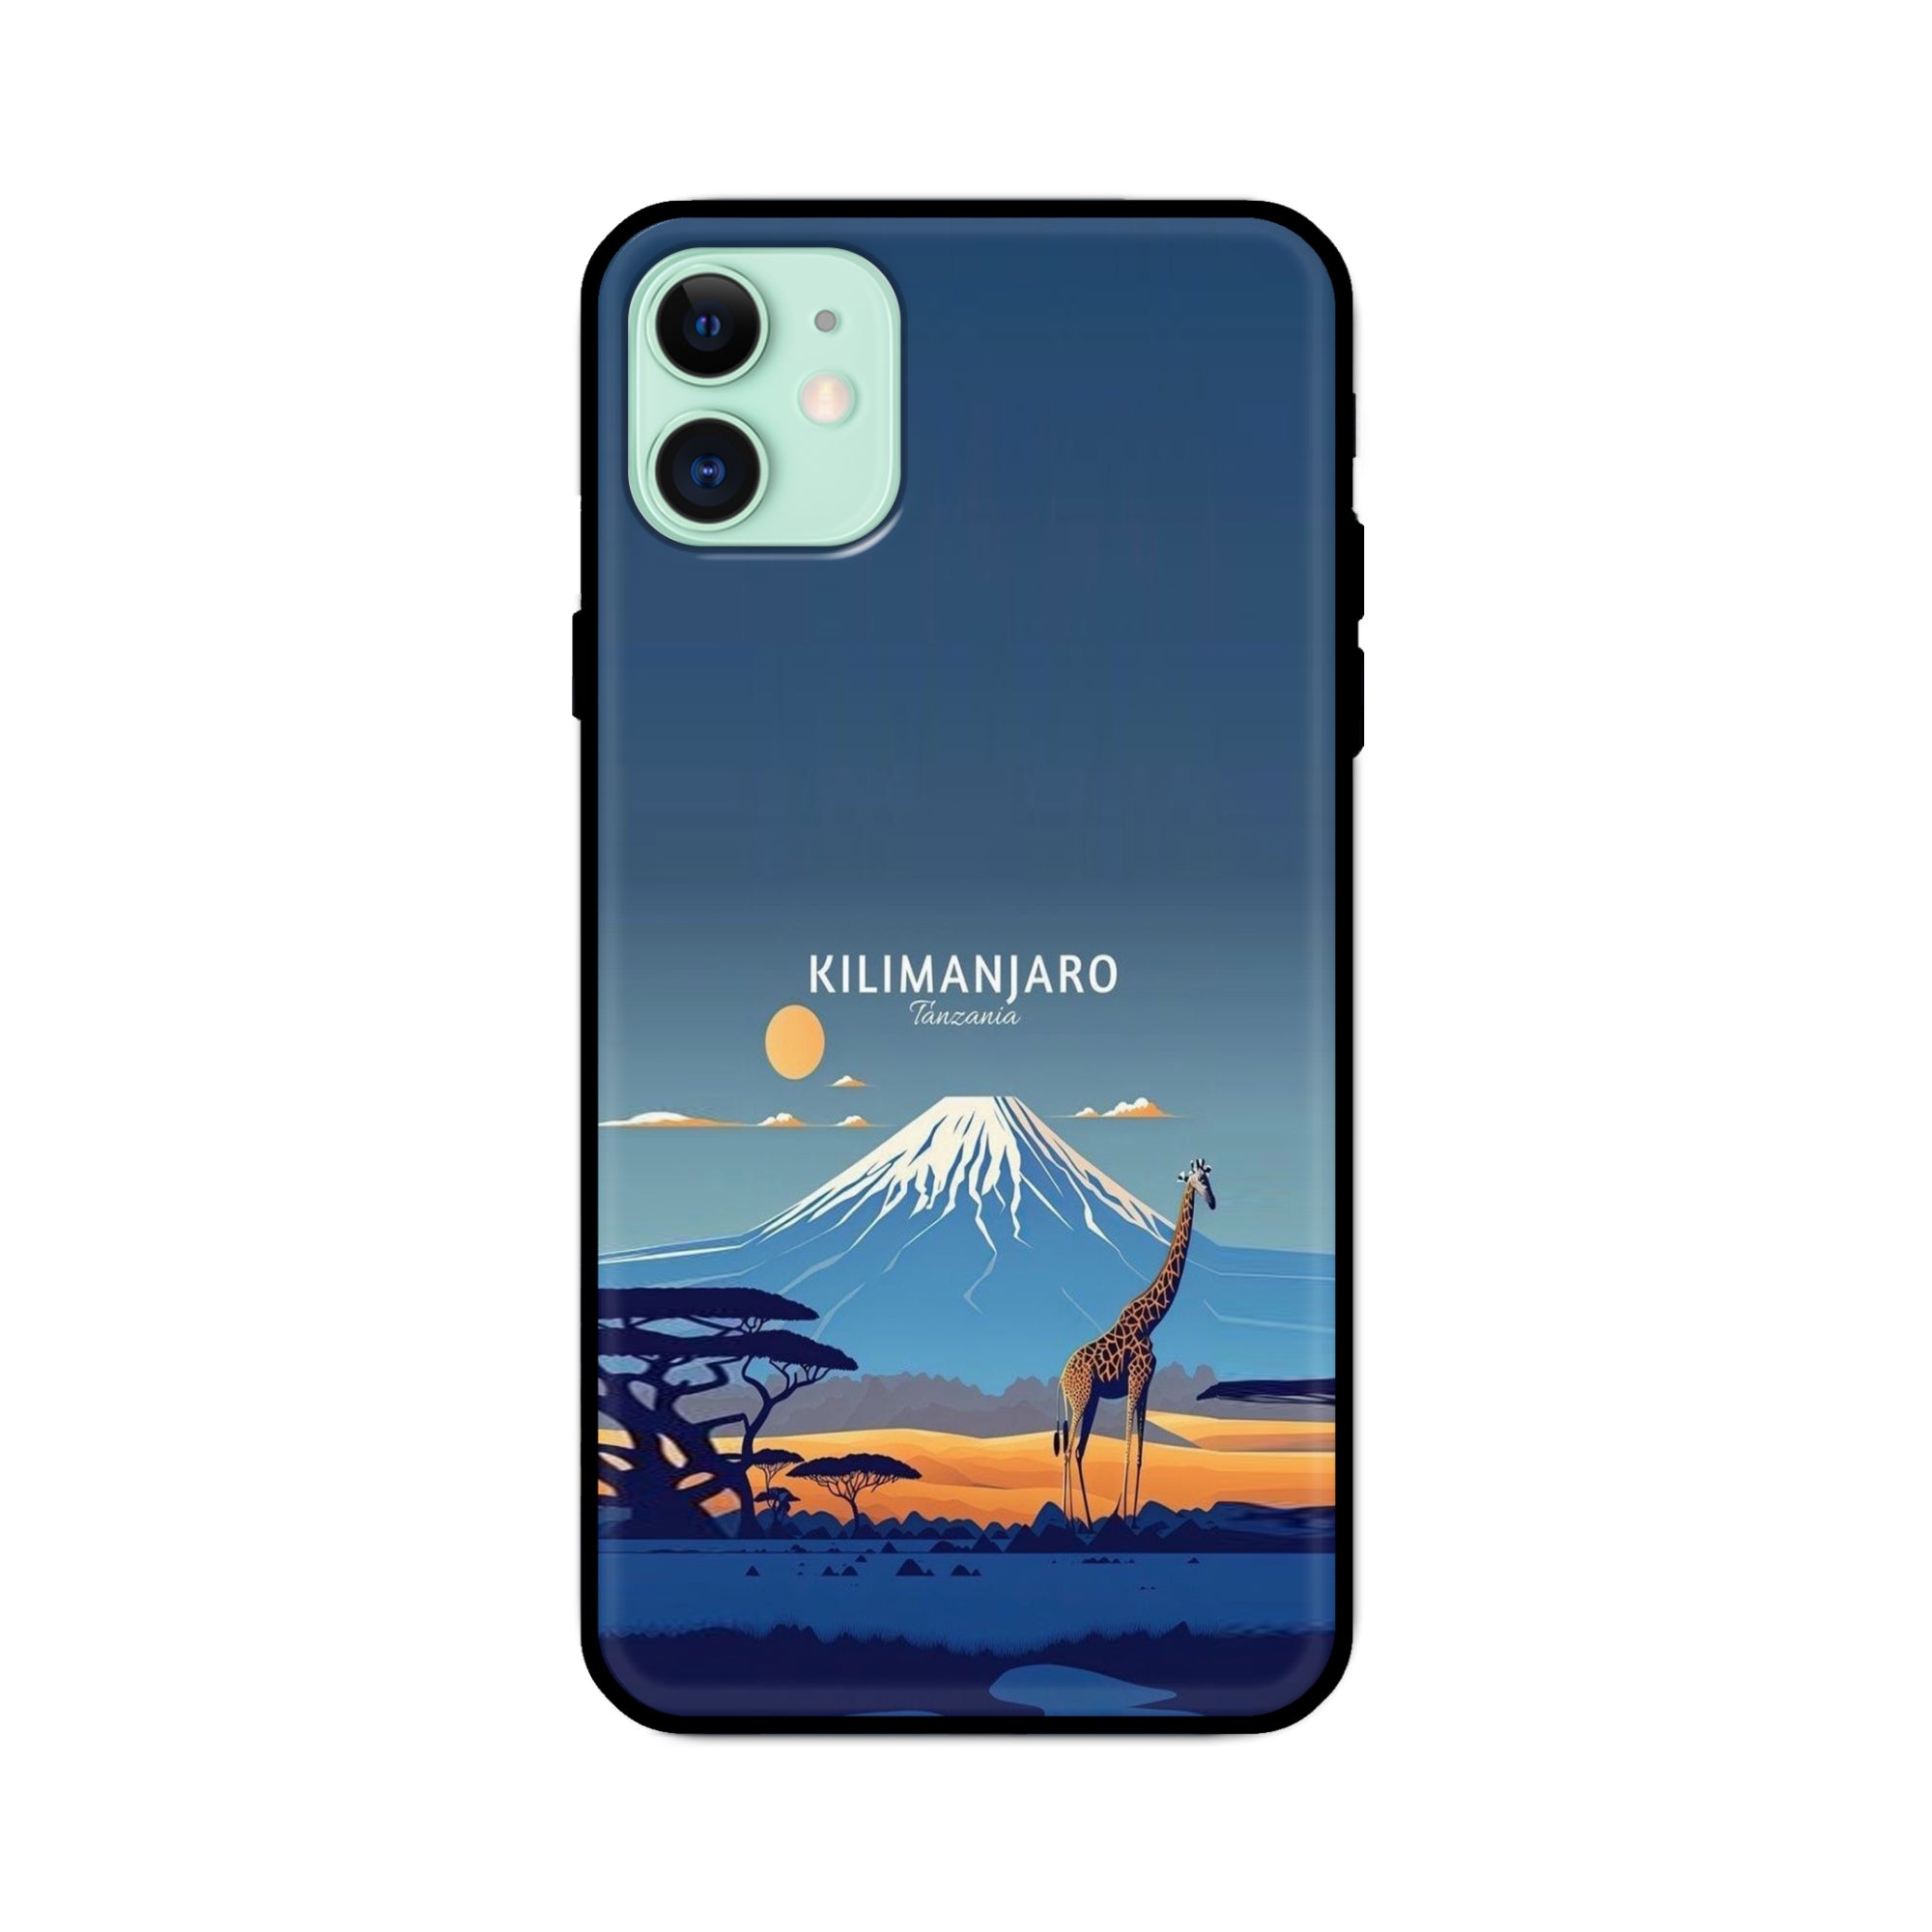 Buy Kilimanjaro Glass/Metal Back Mobile Phone Case/Cover For iPhone 11 Online